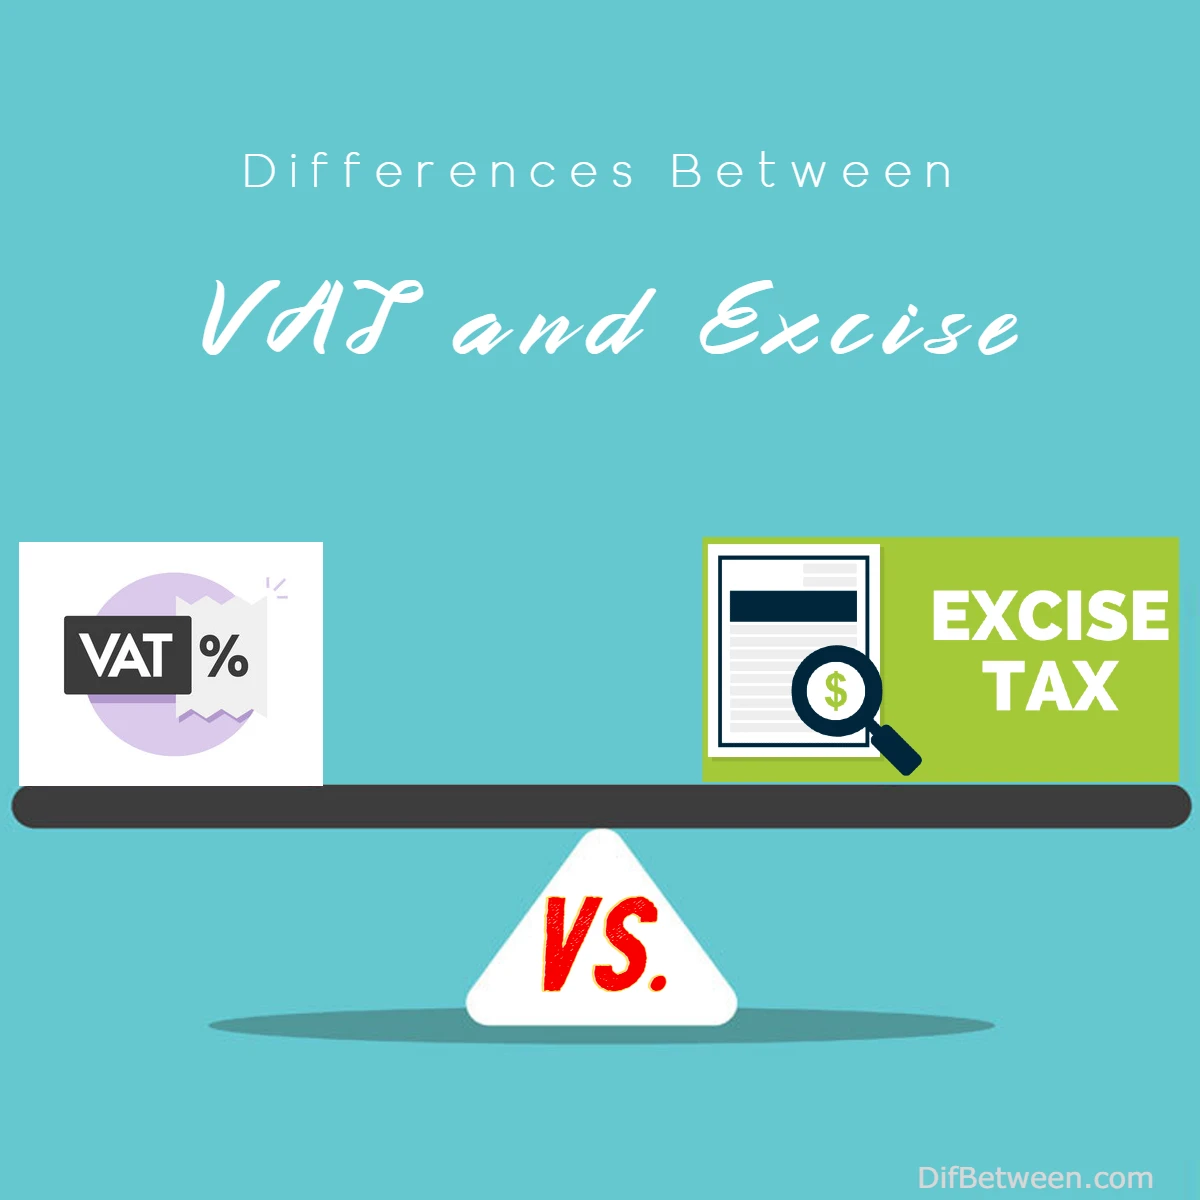 Differences Between Excise tax and VAT tax